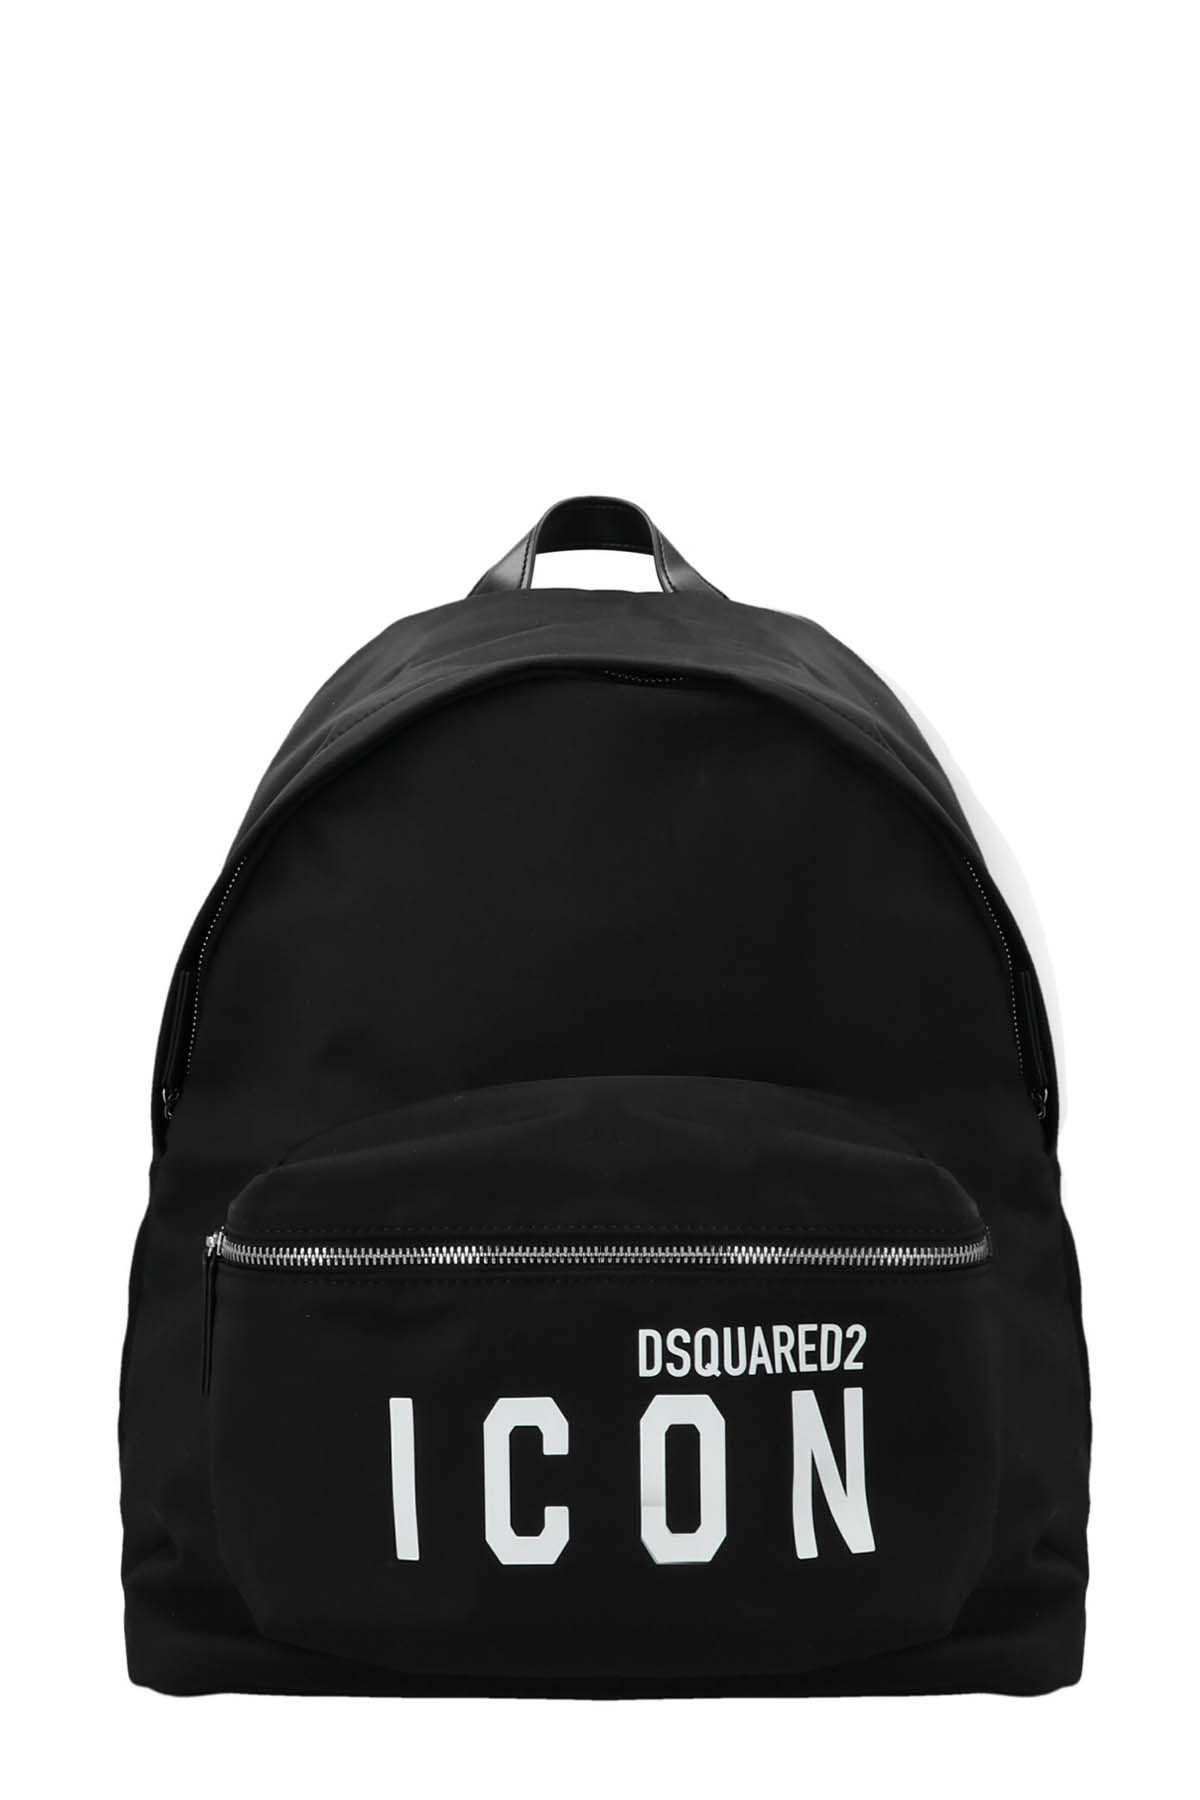 DSQUARED2 'Icon’ Backpack